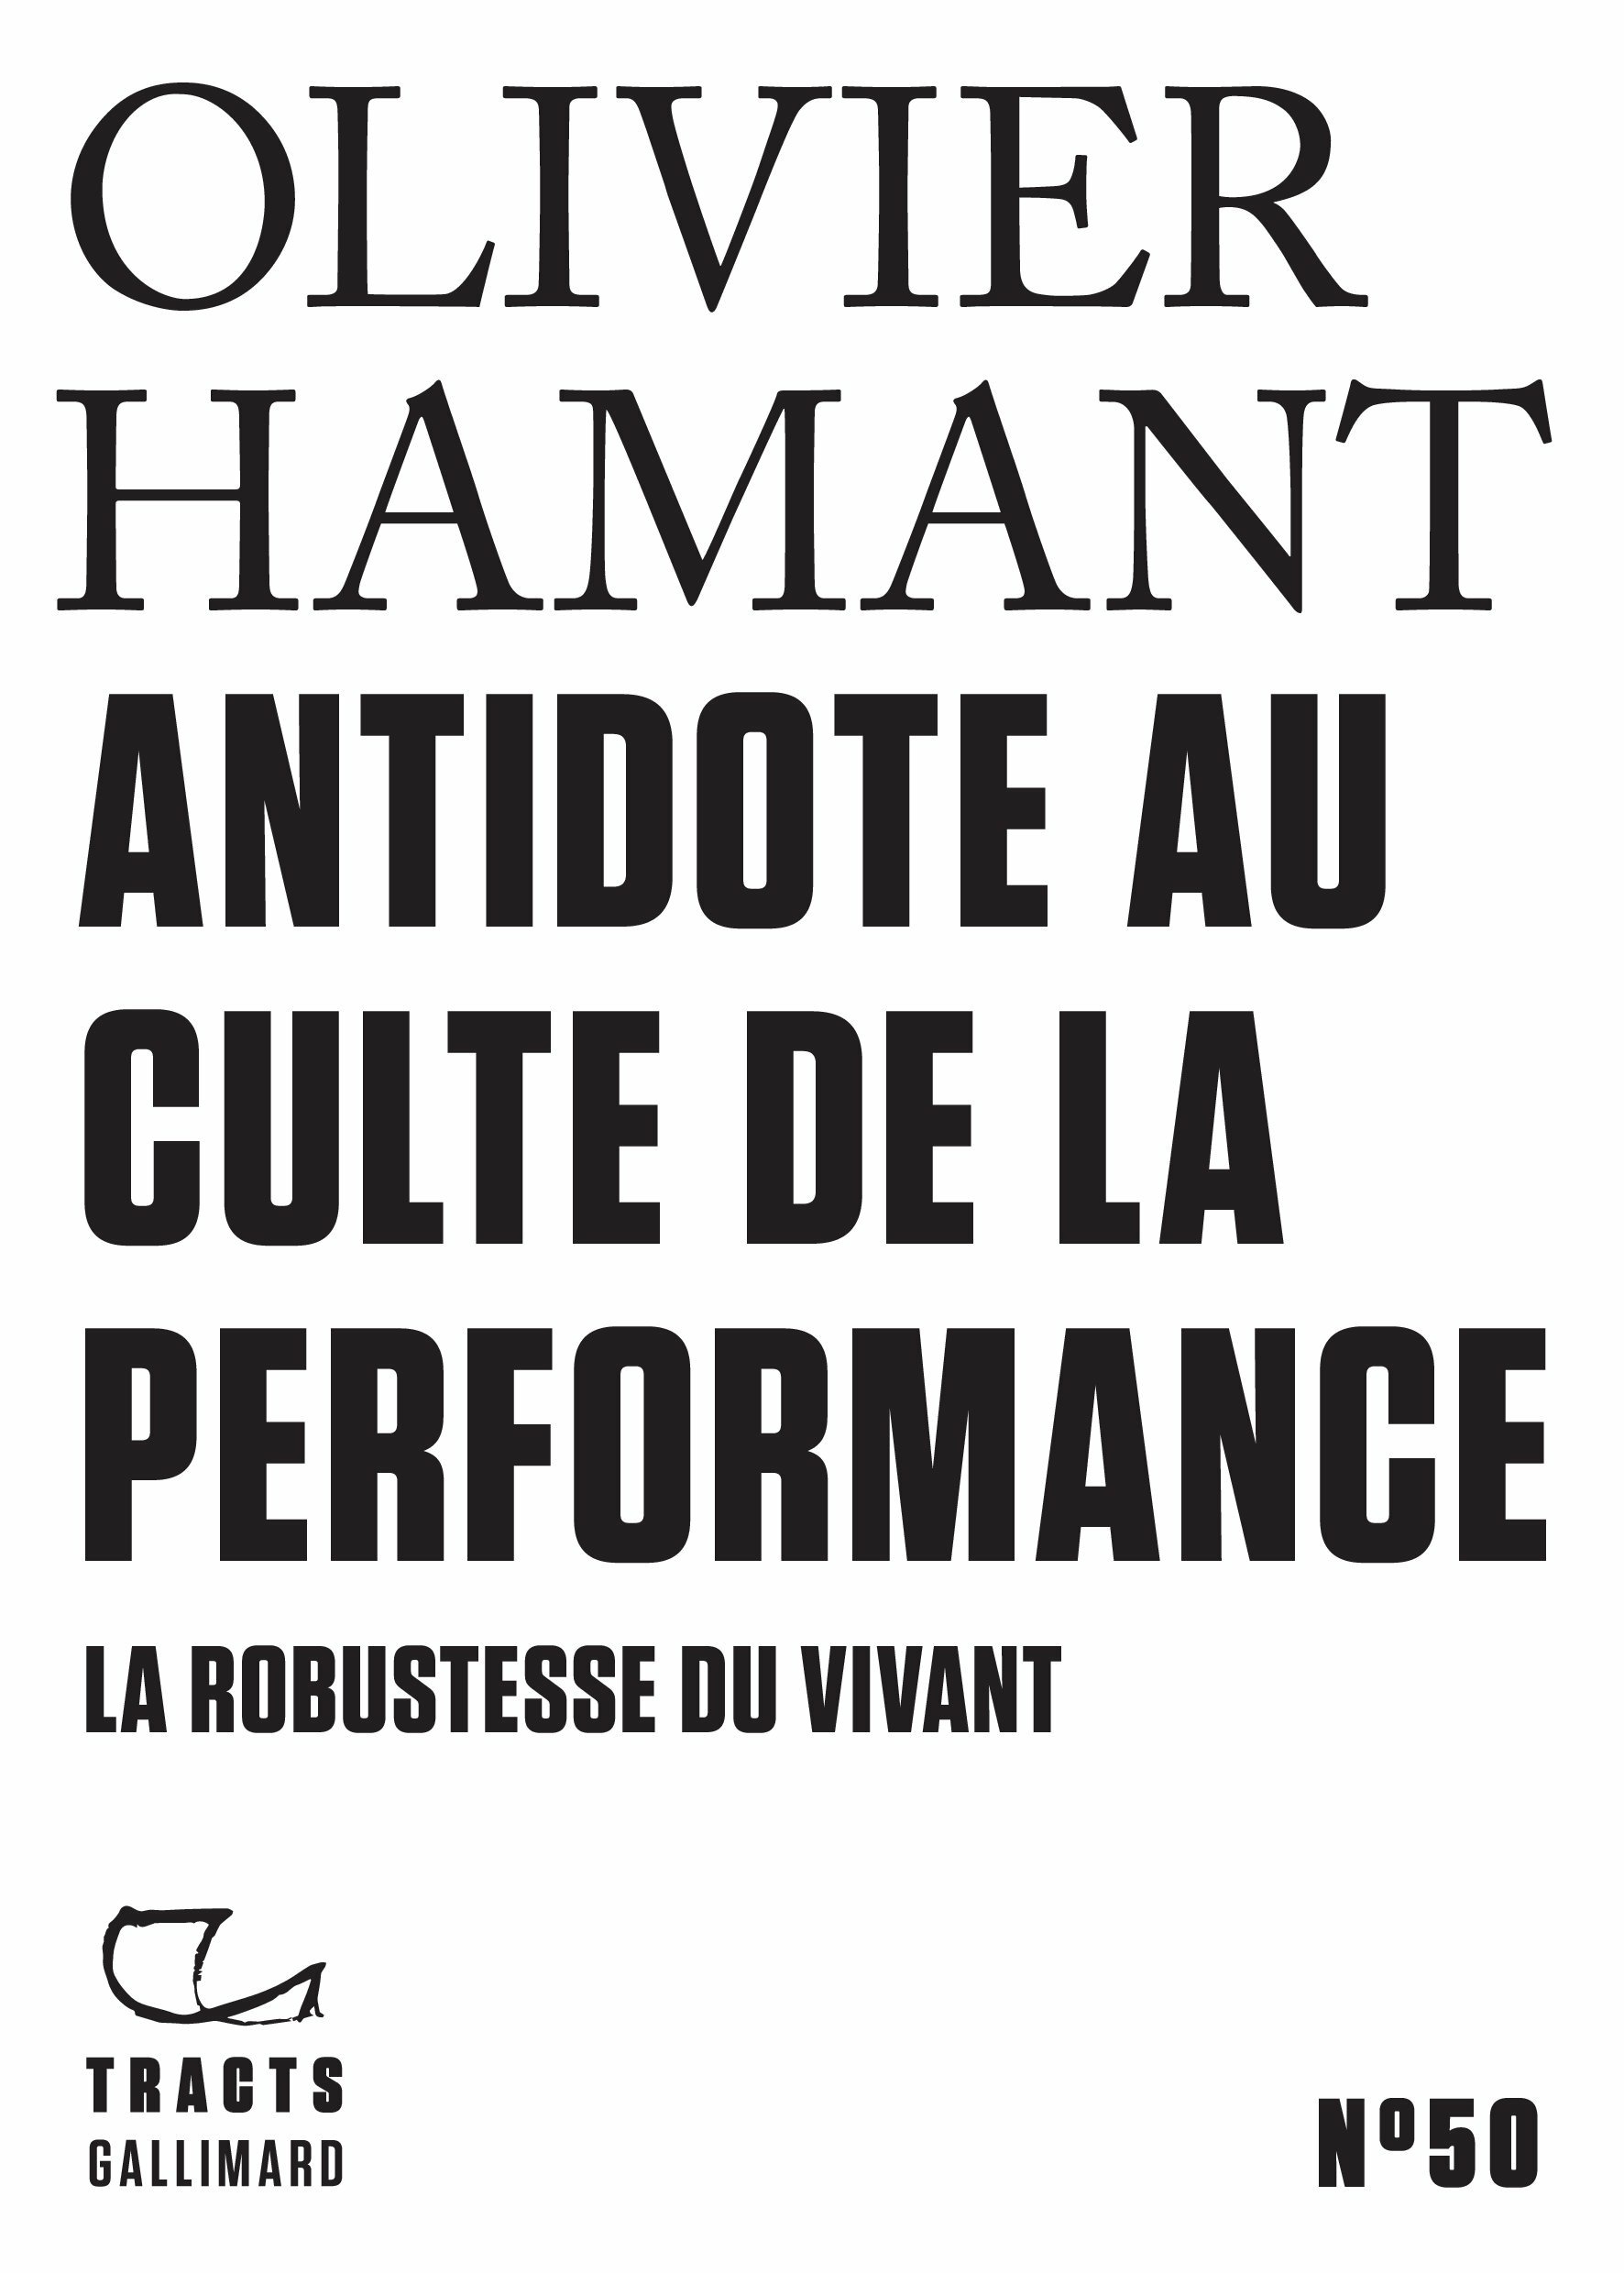 antidoteaucultedelaperformance